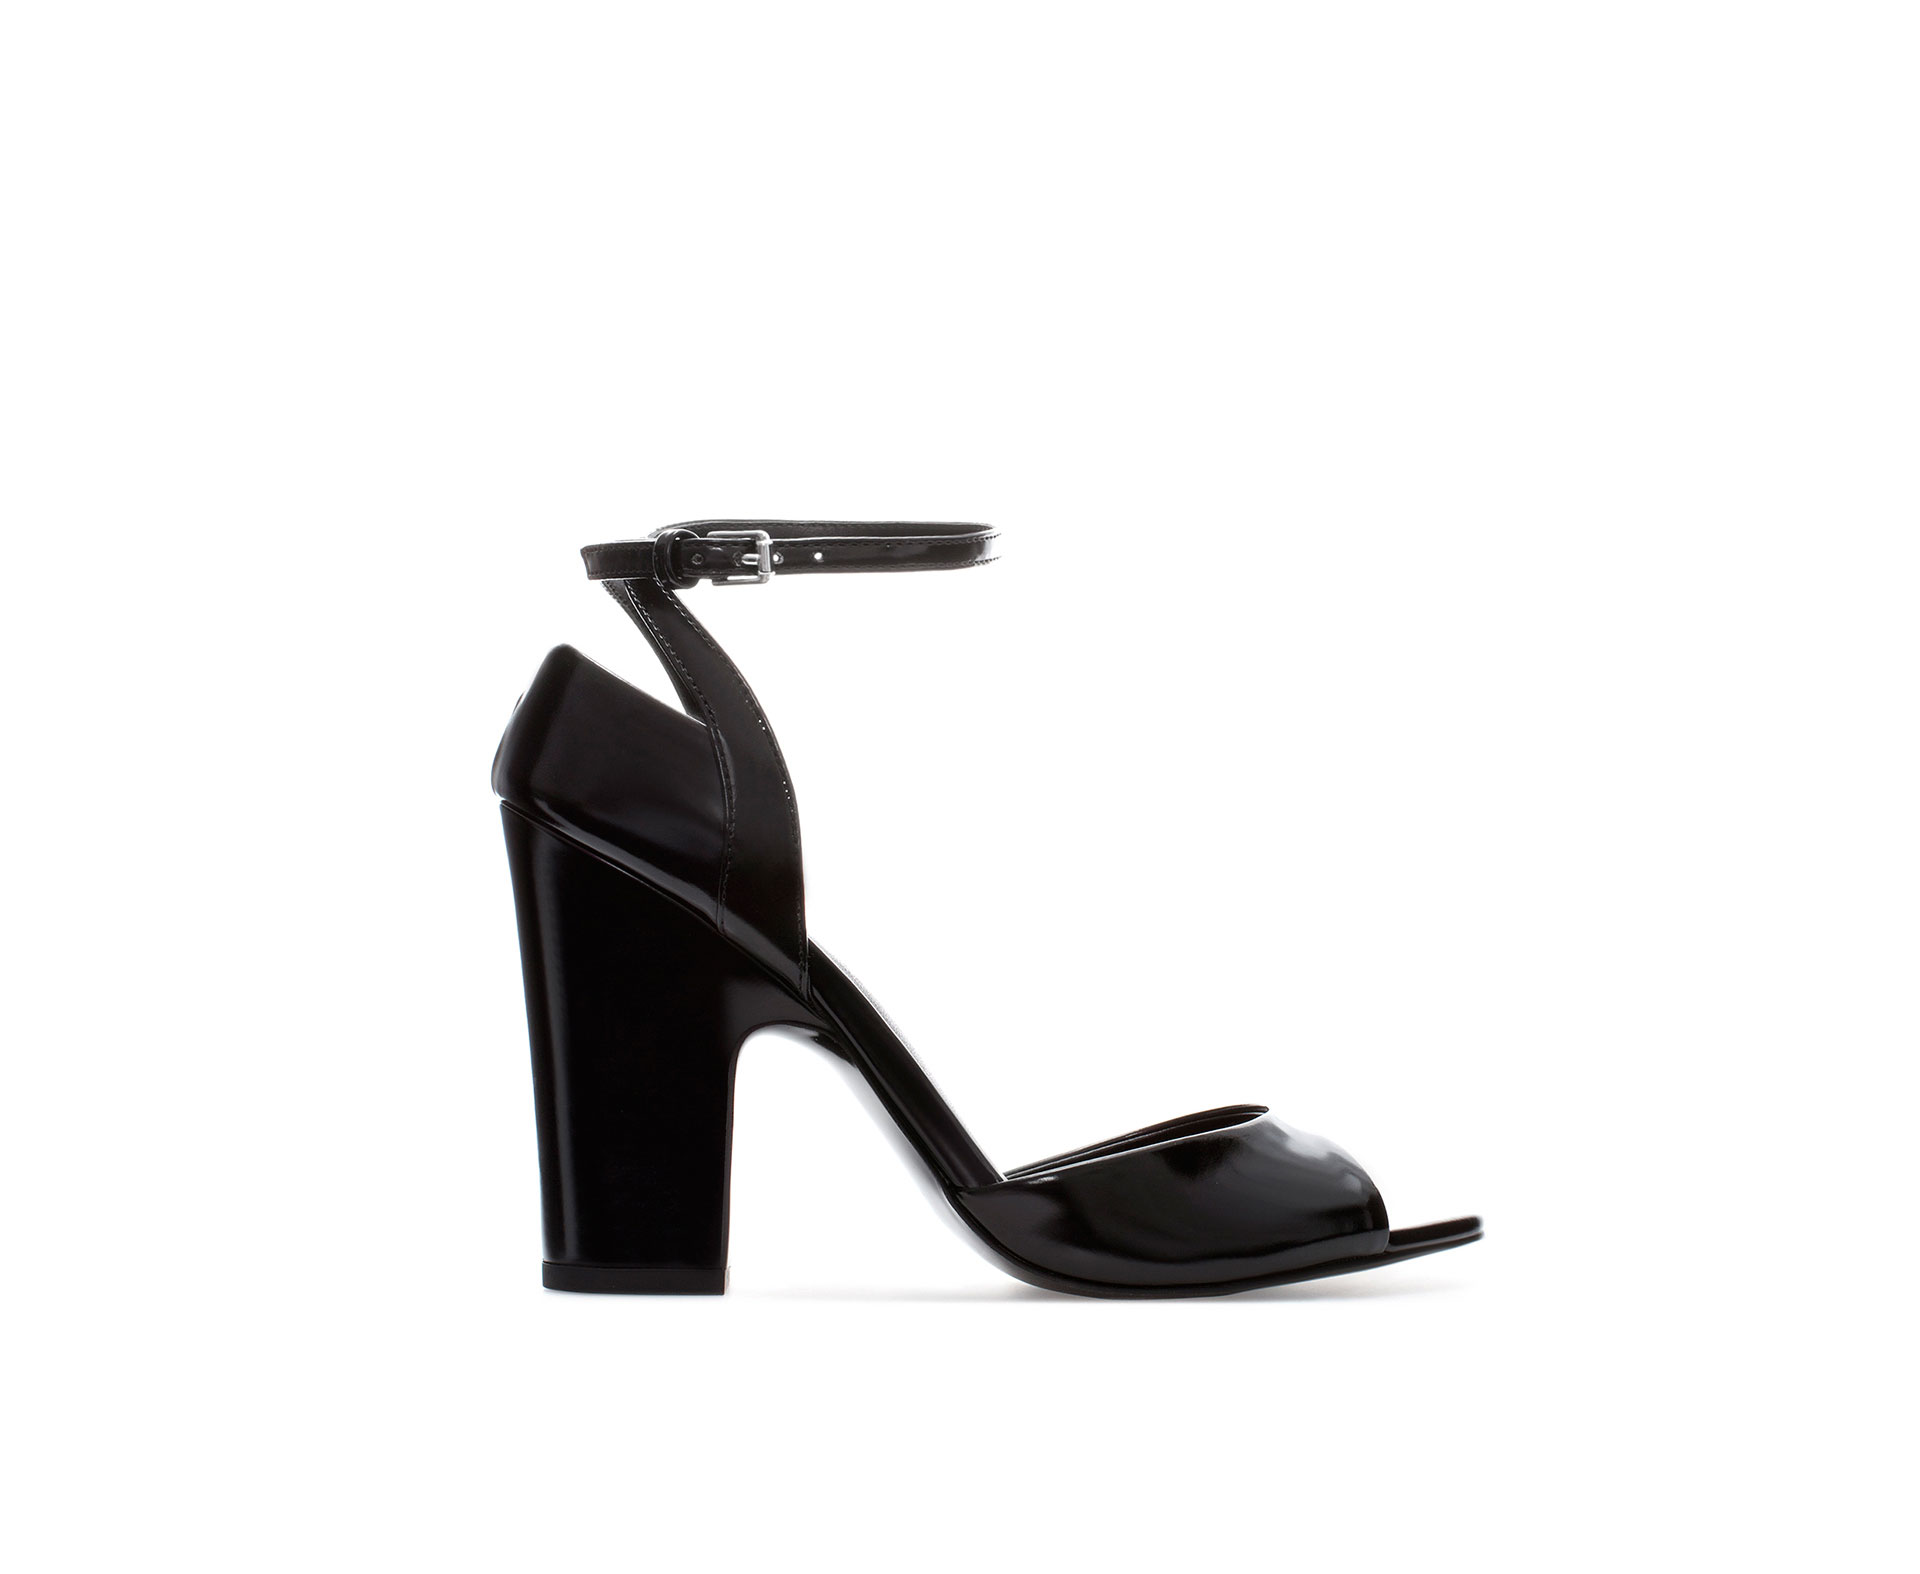 Zara High Heel Sandal with Ankle Strap in Black | Lyst